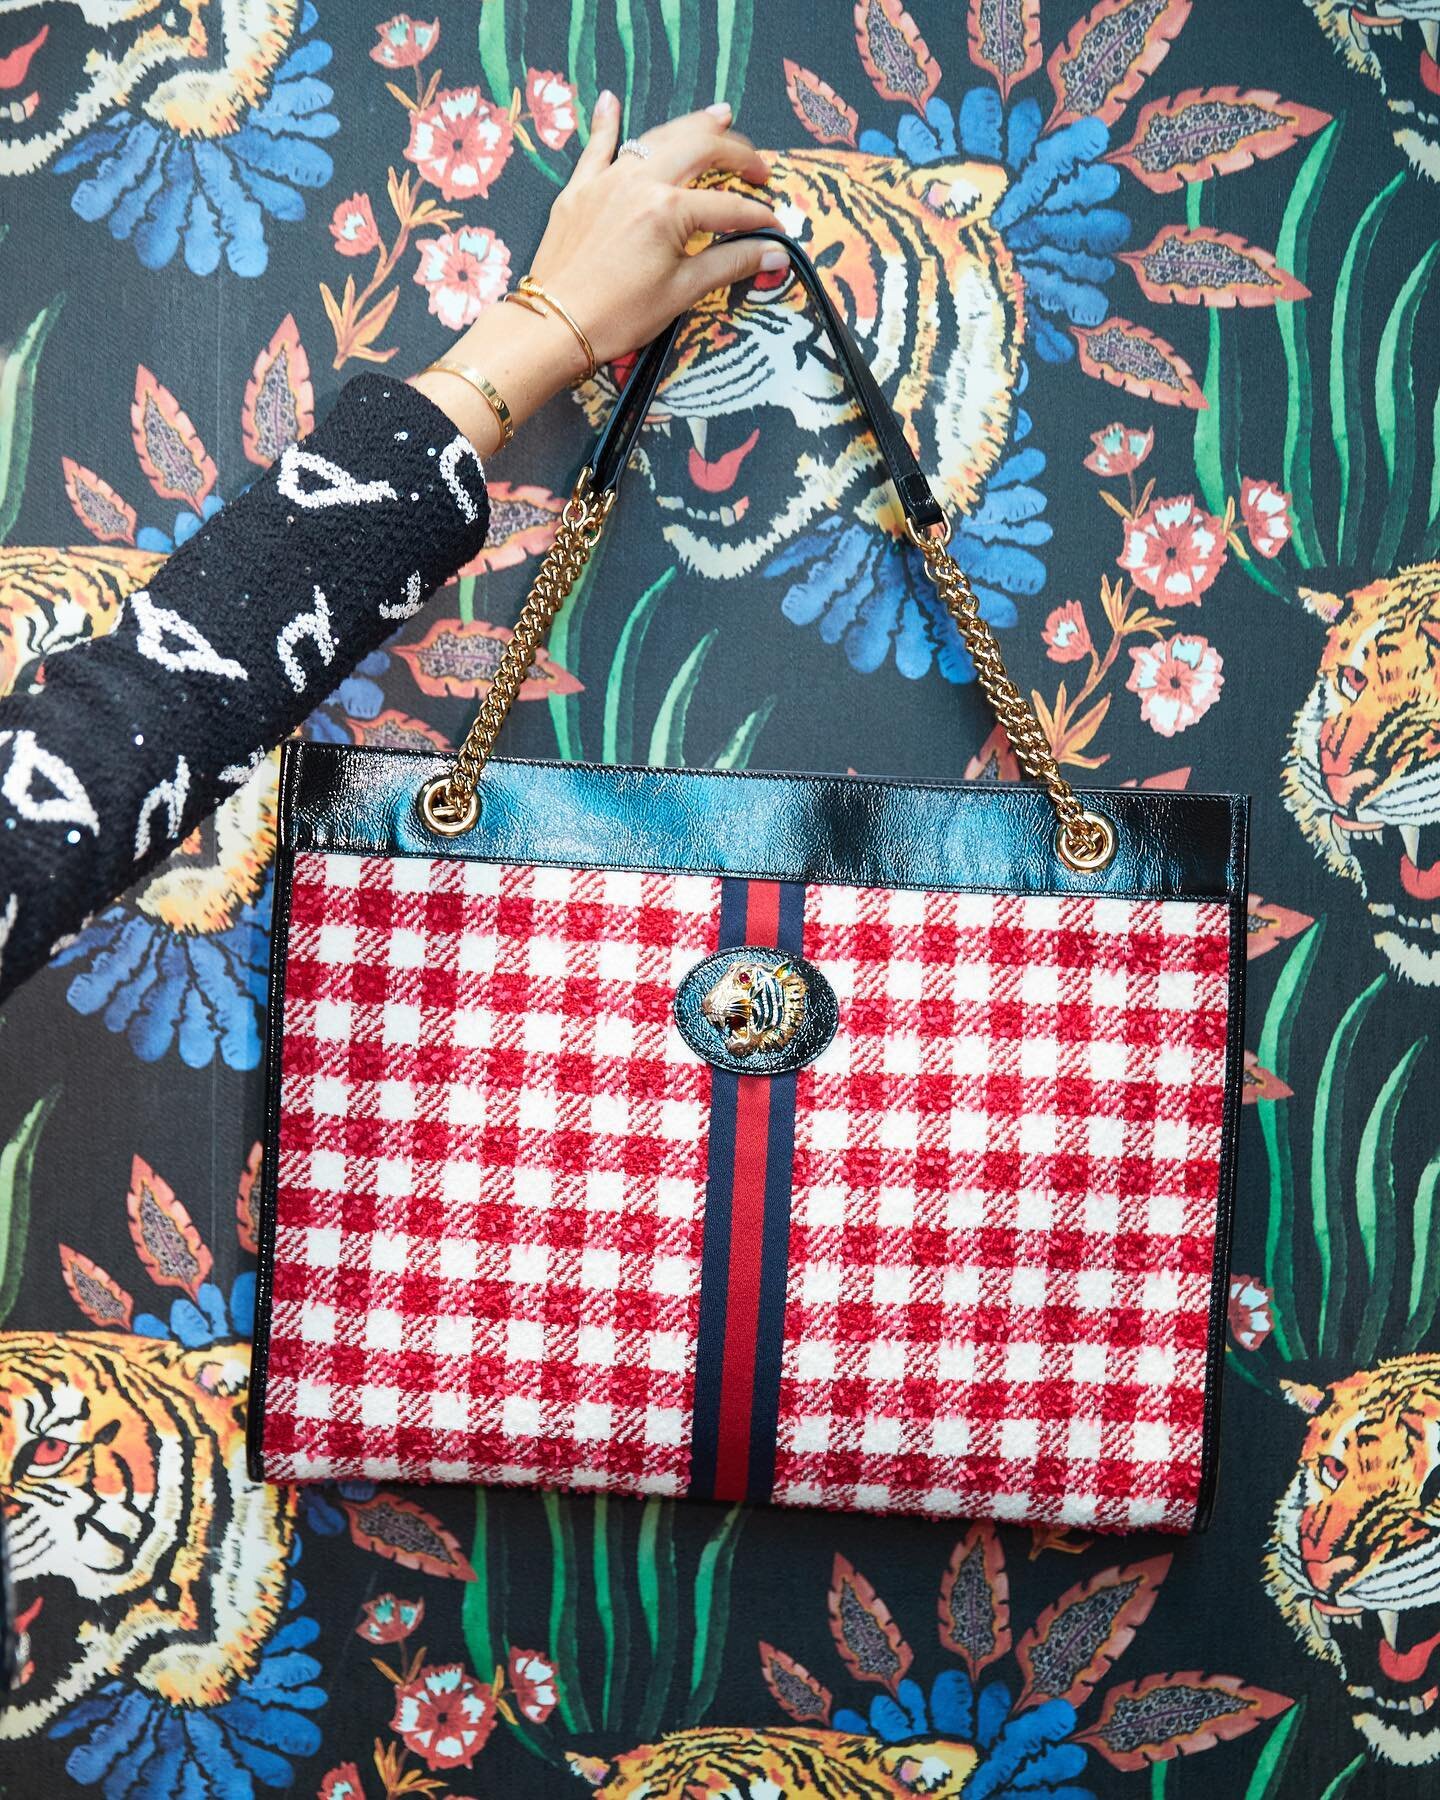 Obsessed with this @Gucci Rajah Wool Blend Tote! One of the best parts? 100% of the proceeds support @face_foundation, helping pets in need of emergency veterinary care! Check out @wagnpurrshop for more treasures and feel good knowing your purchase s